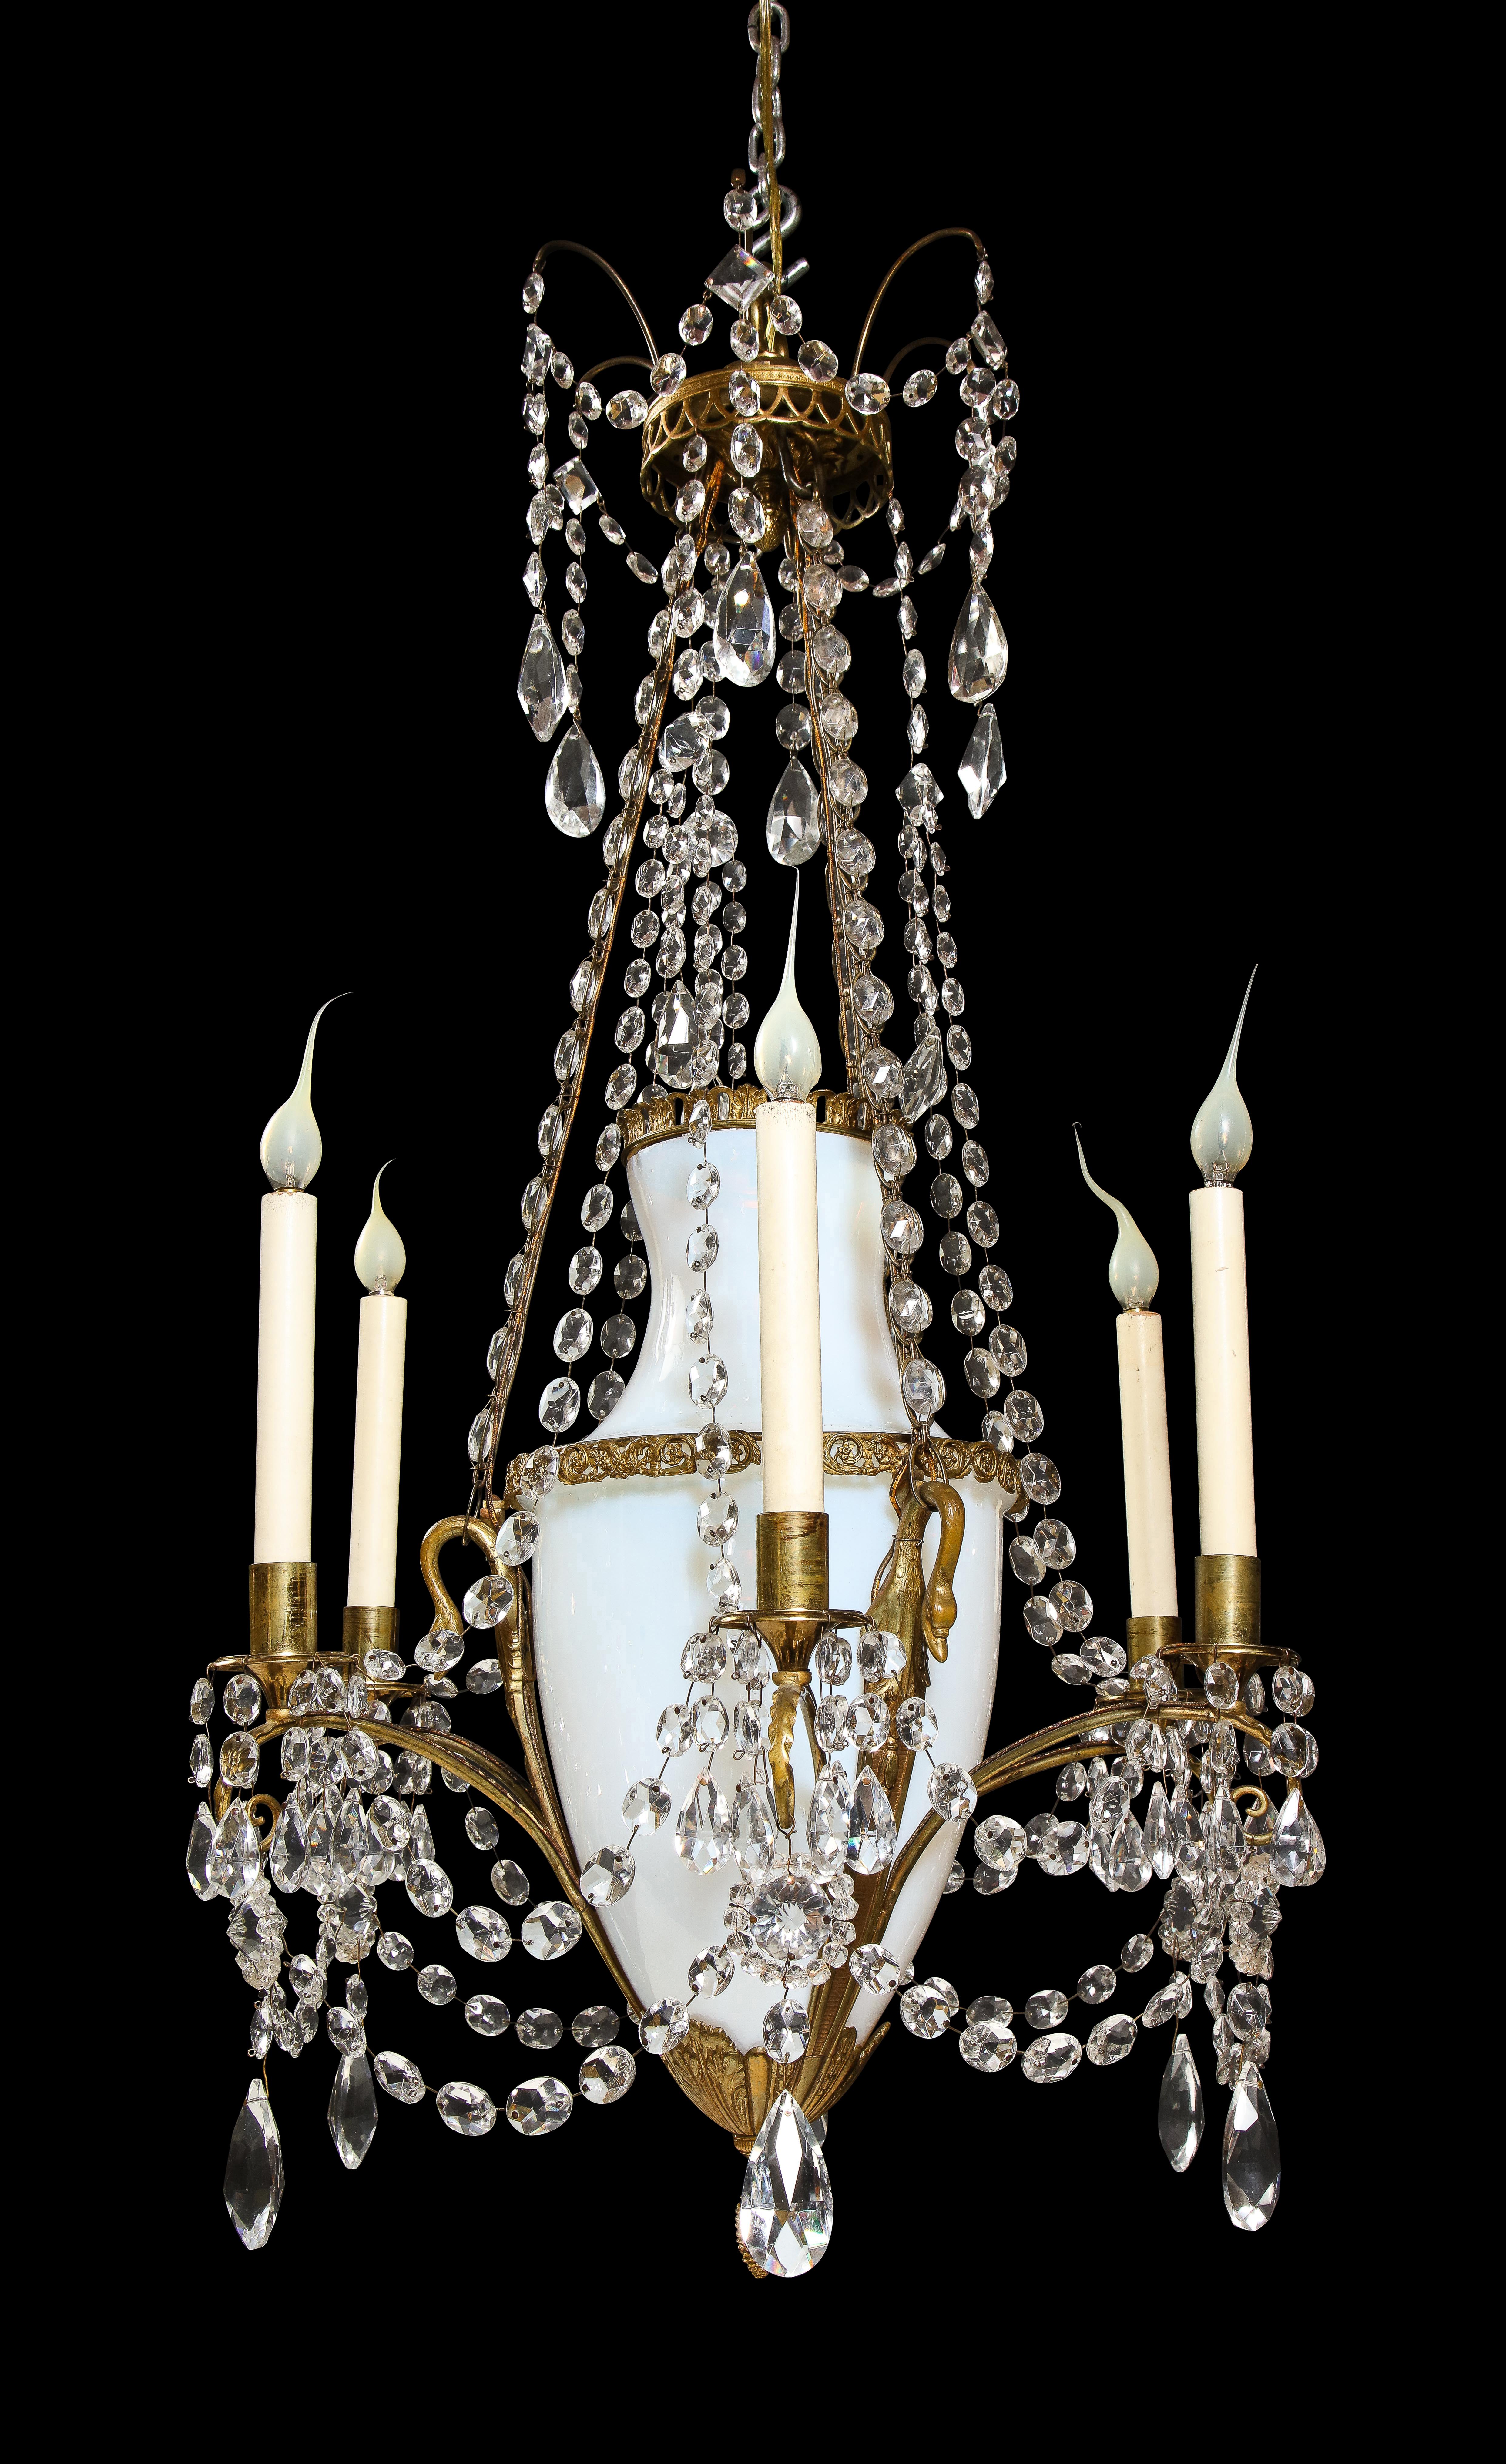 20th Century Antique Russian Neoclassical Gilt Bronze, Opaline Glass and Crystal Chandelier For Sale